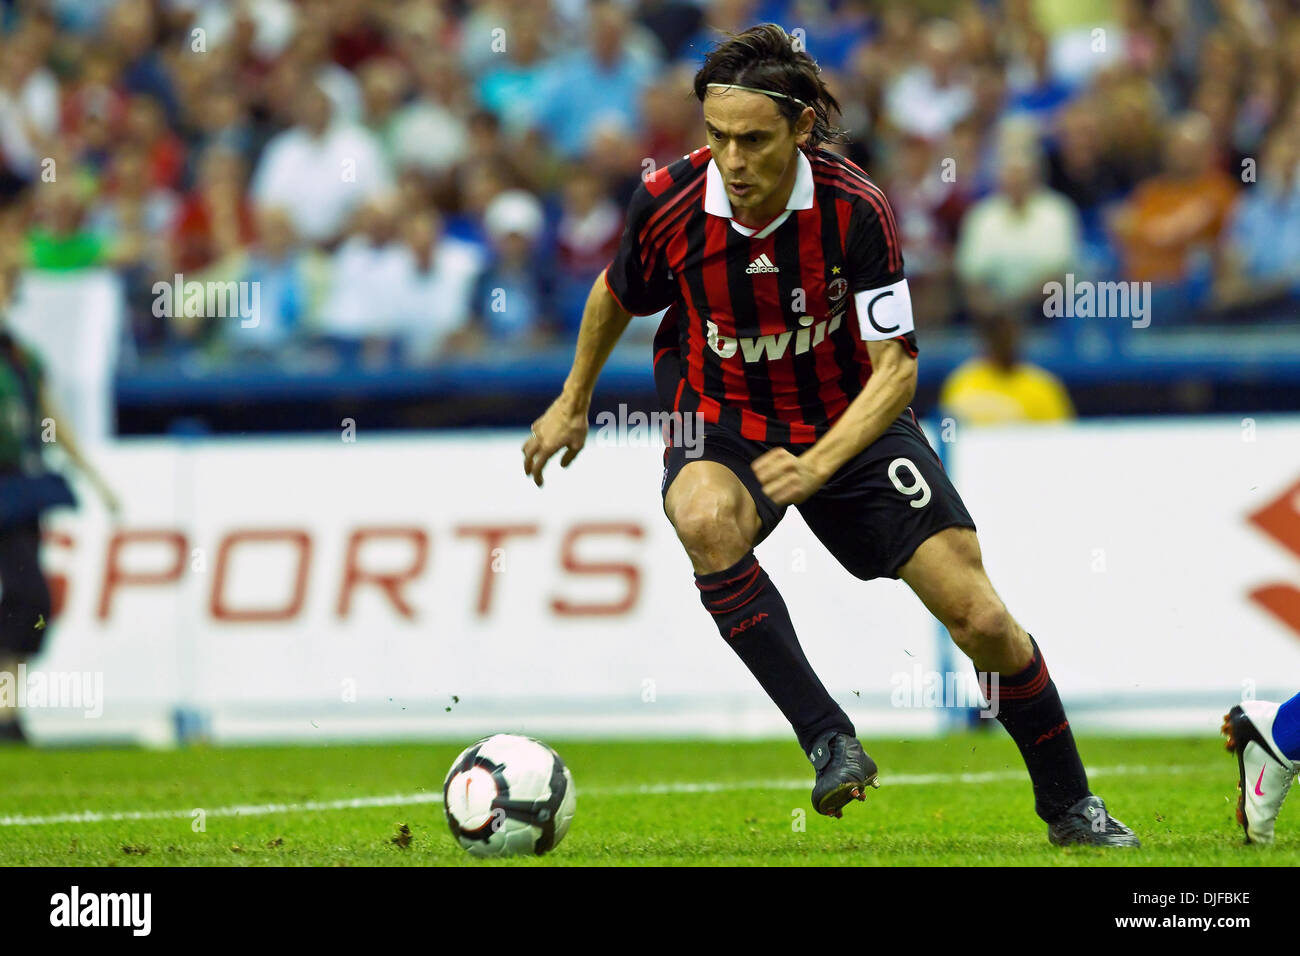 AC Milan's forward Filippo Inzaghi (#9) in game action during play of the friendly FIFA exhibition game between AC Milan and the Montreal Imapct played at the Olympic Stadium in Montreal, Canada. (Credit Image: © Leon Switzer/Southcreek Global/ZUMApress.com) Stock Photo